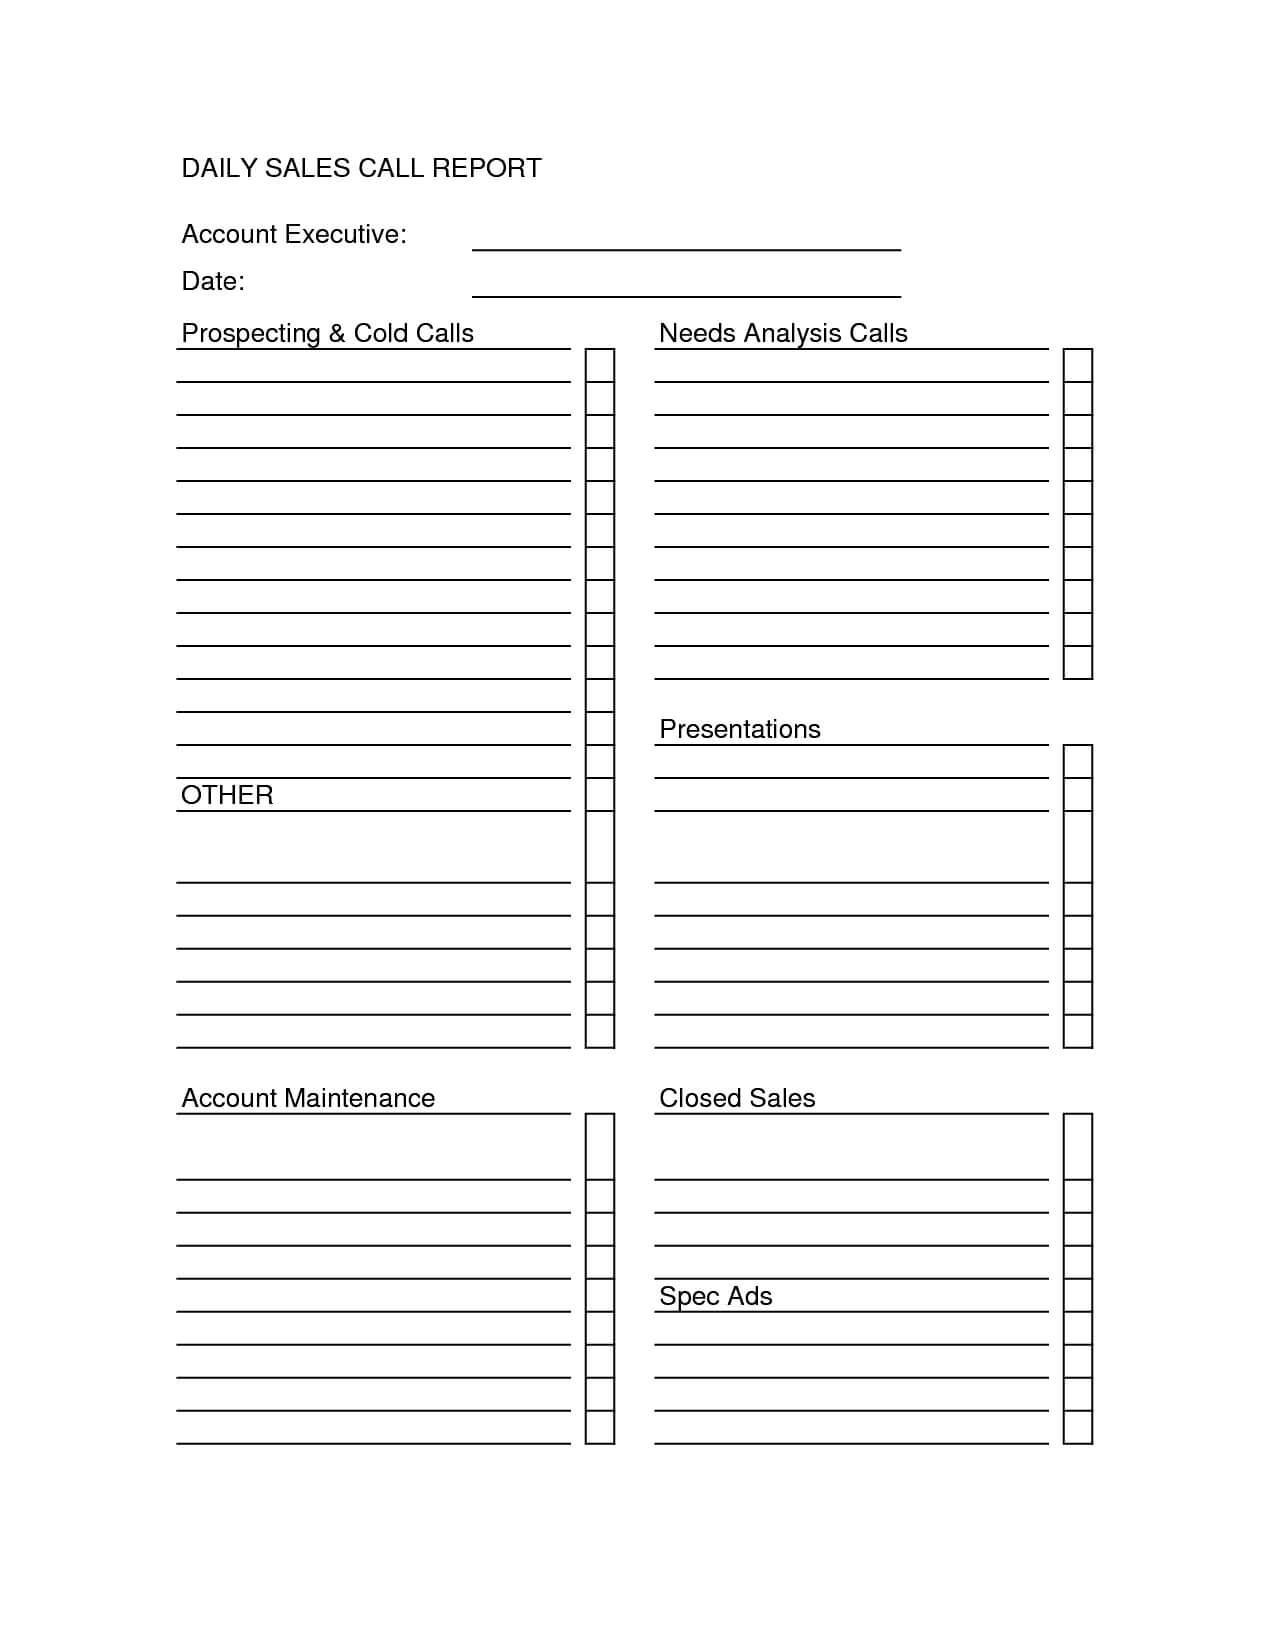 Sales Call Report Templates – Word Excel Fomats Inside Daily Sales Call Report Template Free Download